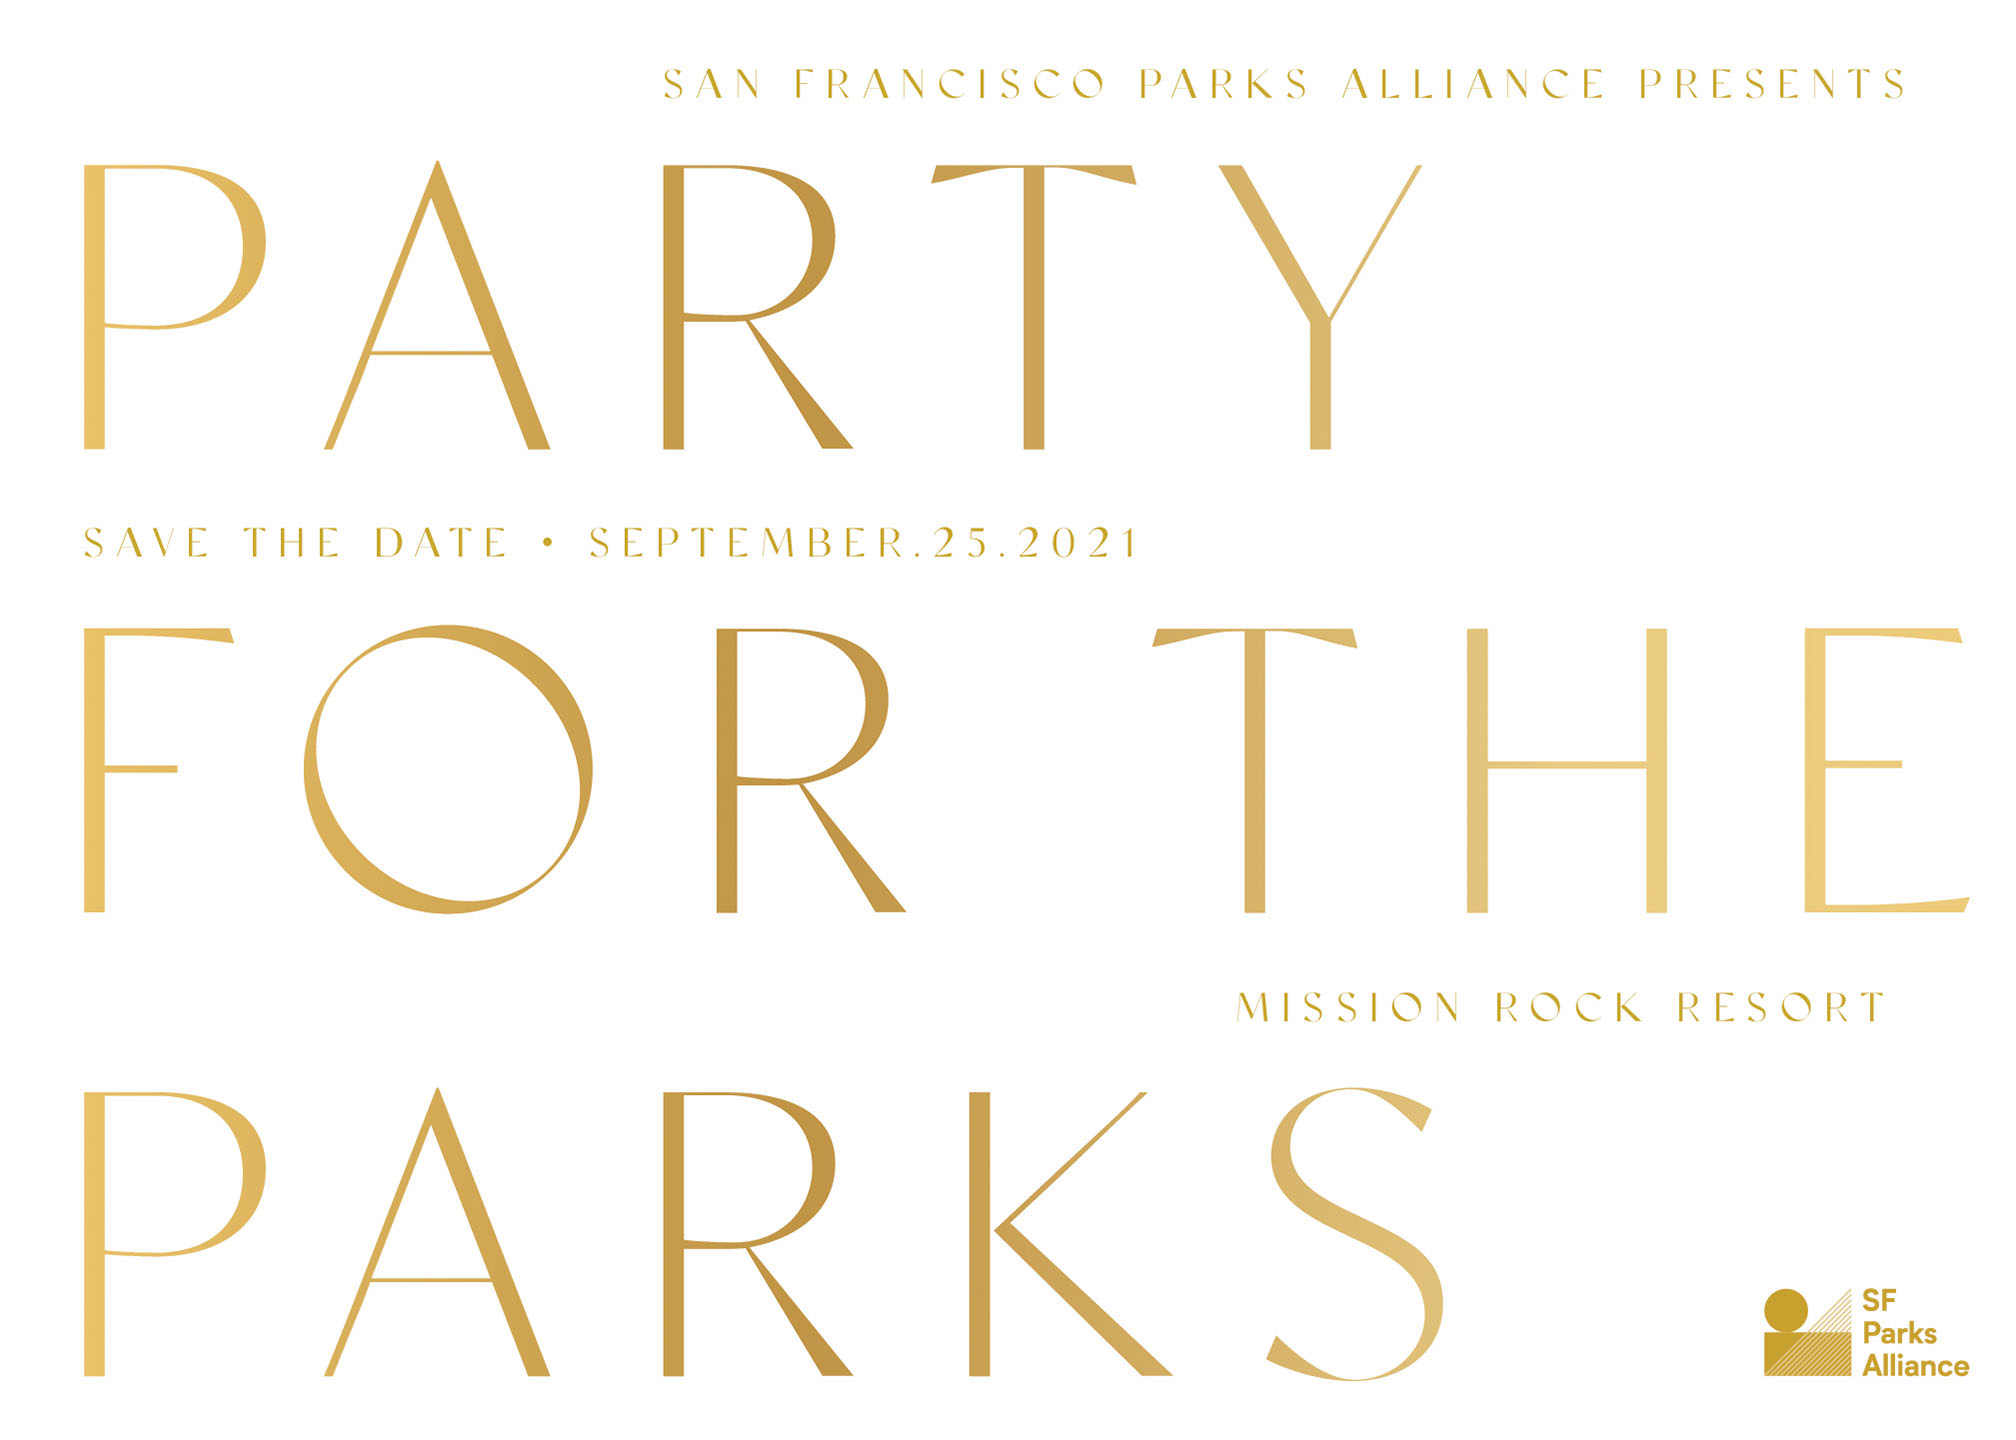 Party for the Parks Campaign